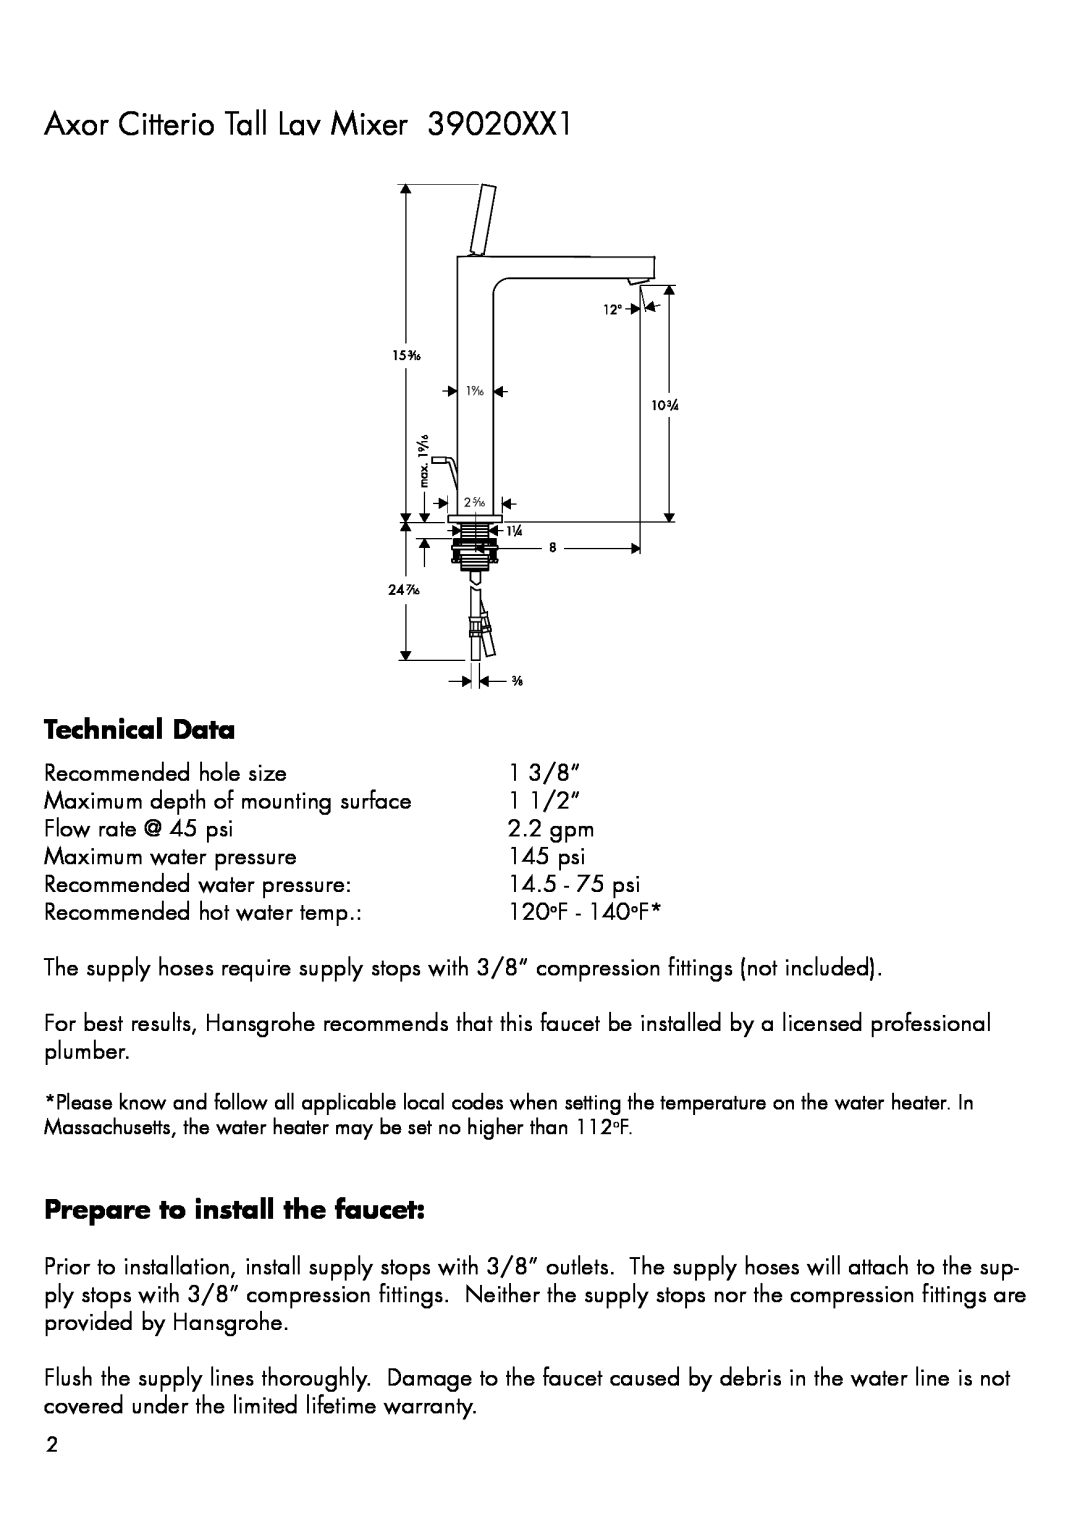 Hans Grohe 39020XX1 installation instructions Technical Data, Prepare to install the faucet, Axor Citterio Tall Lav Mixer 